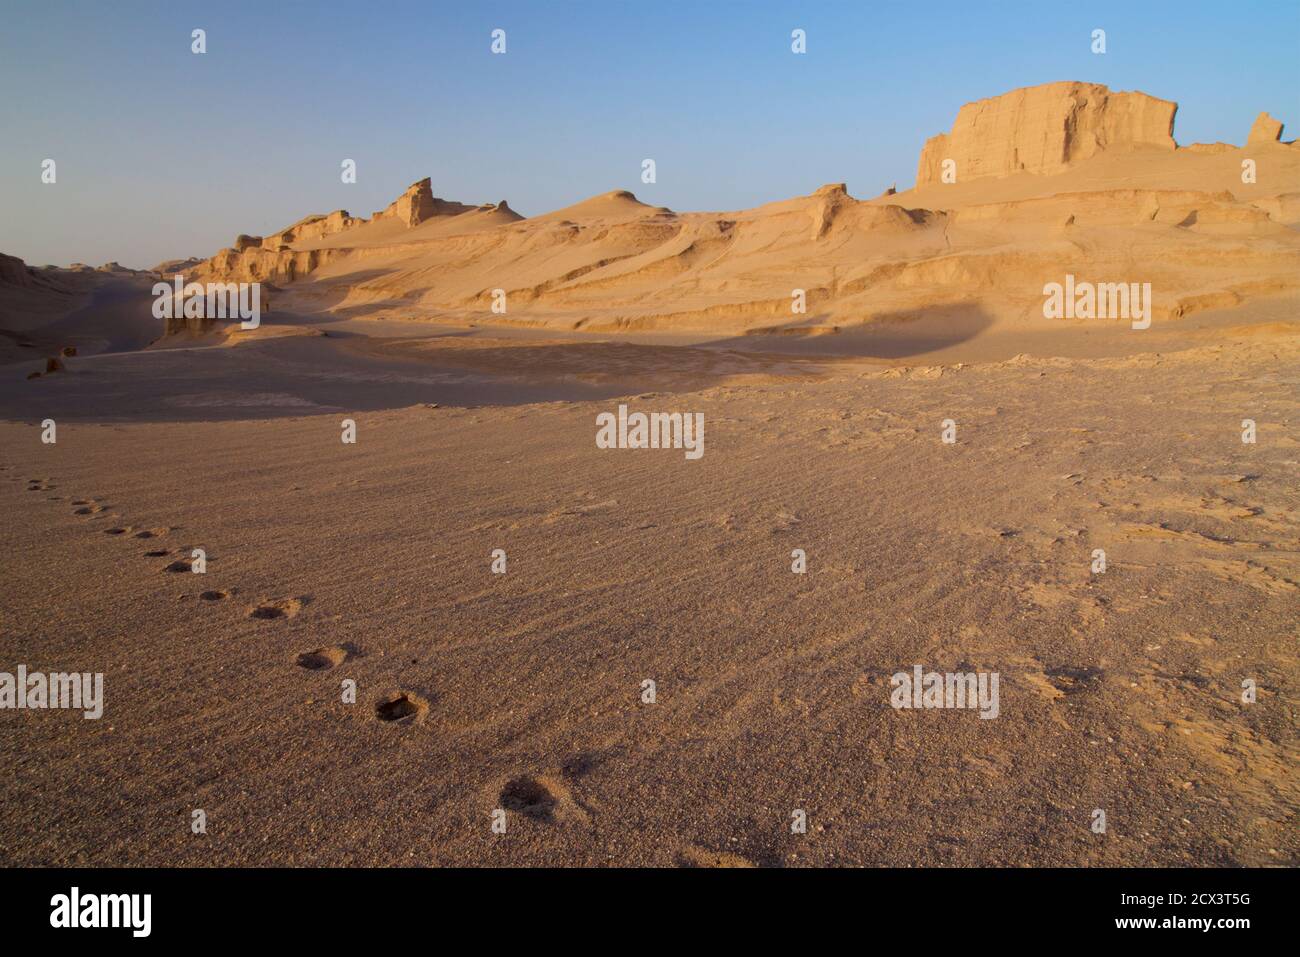 Desert Fox tracks in the sand. Kaluts region of the Lut desert. The hottest place on earth. Iran Stock Photo